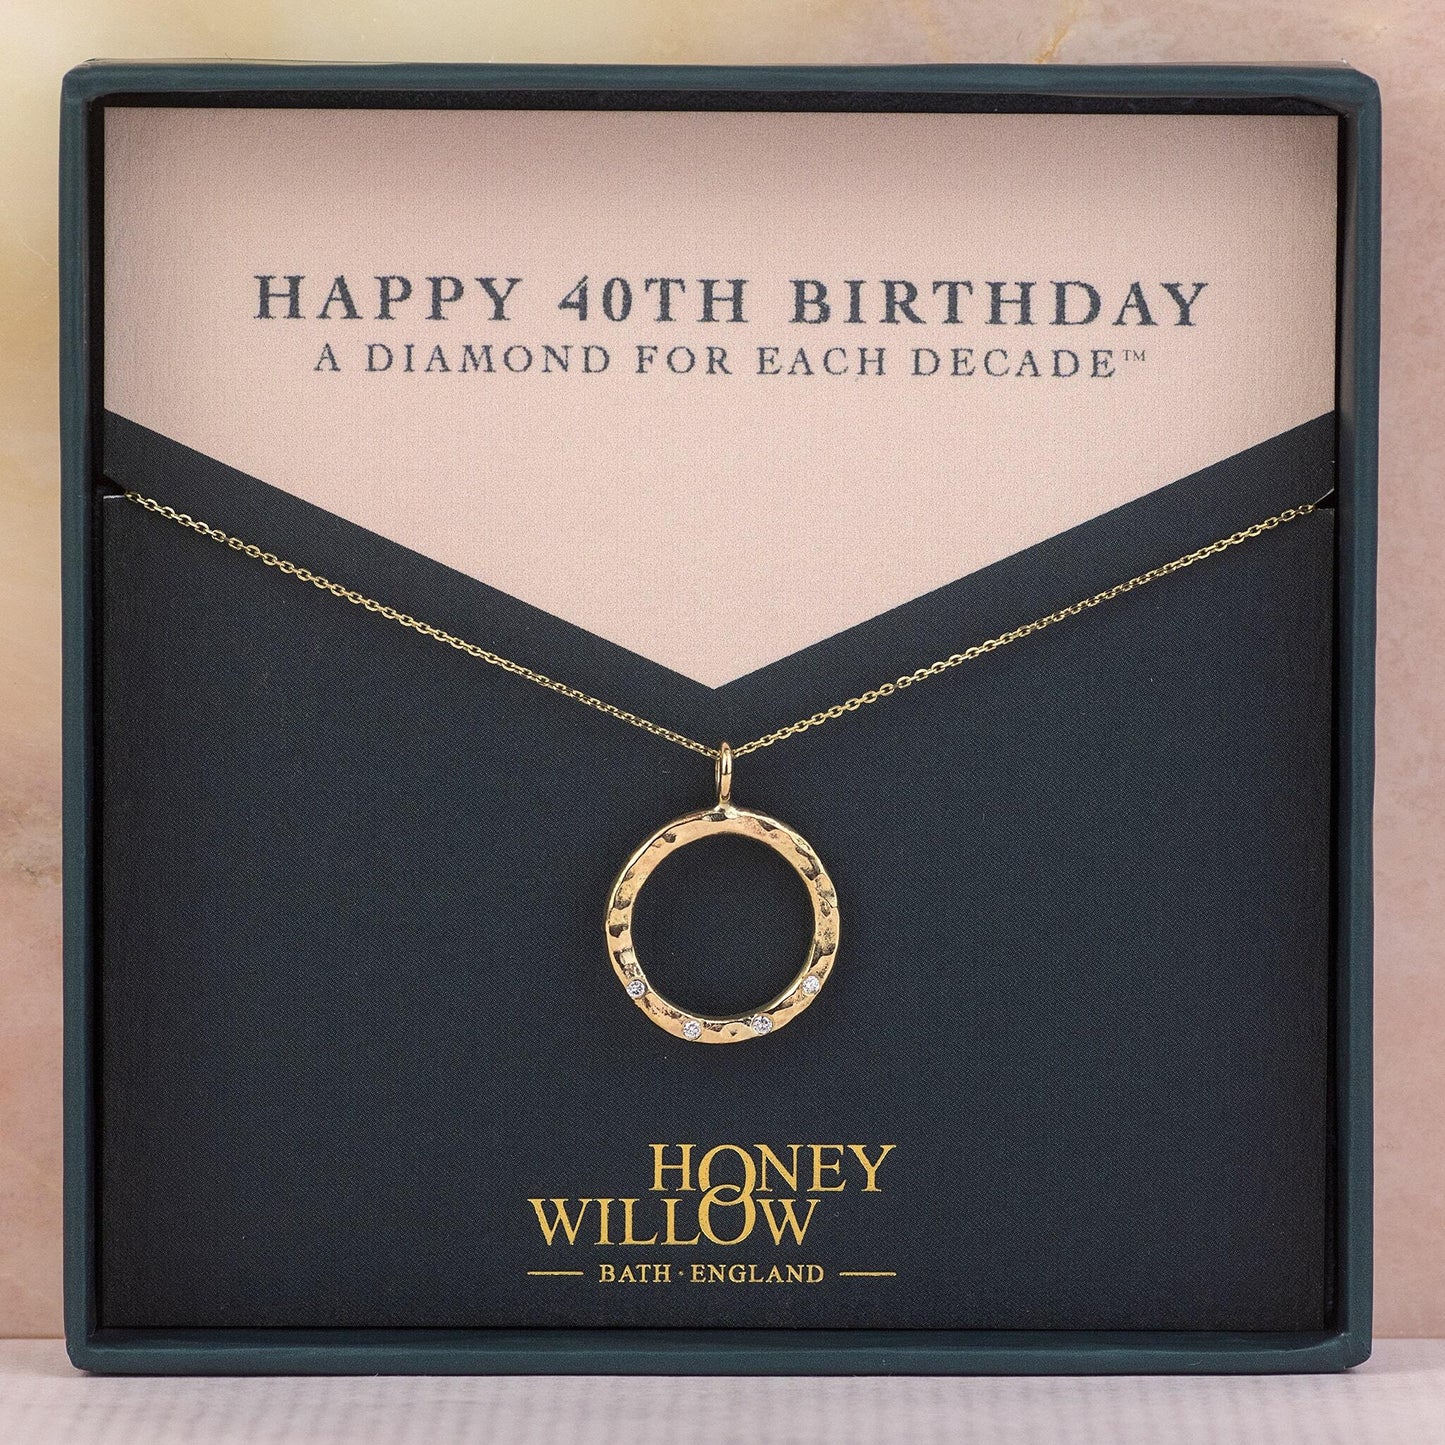 40th Birthday Necklace - A Diamond for Each Decade™ - Recycled 9kt Gold Diamond Halo Necklace